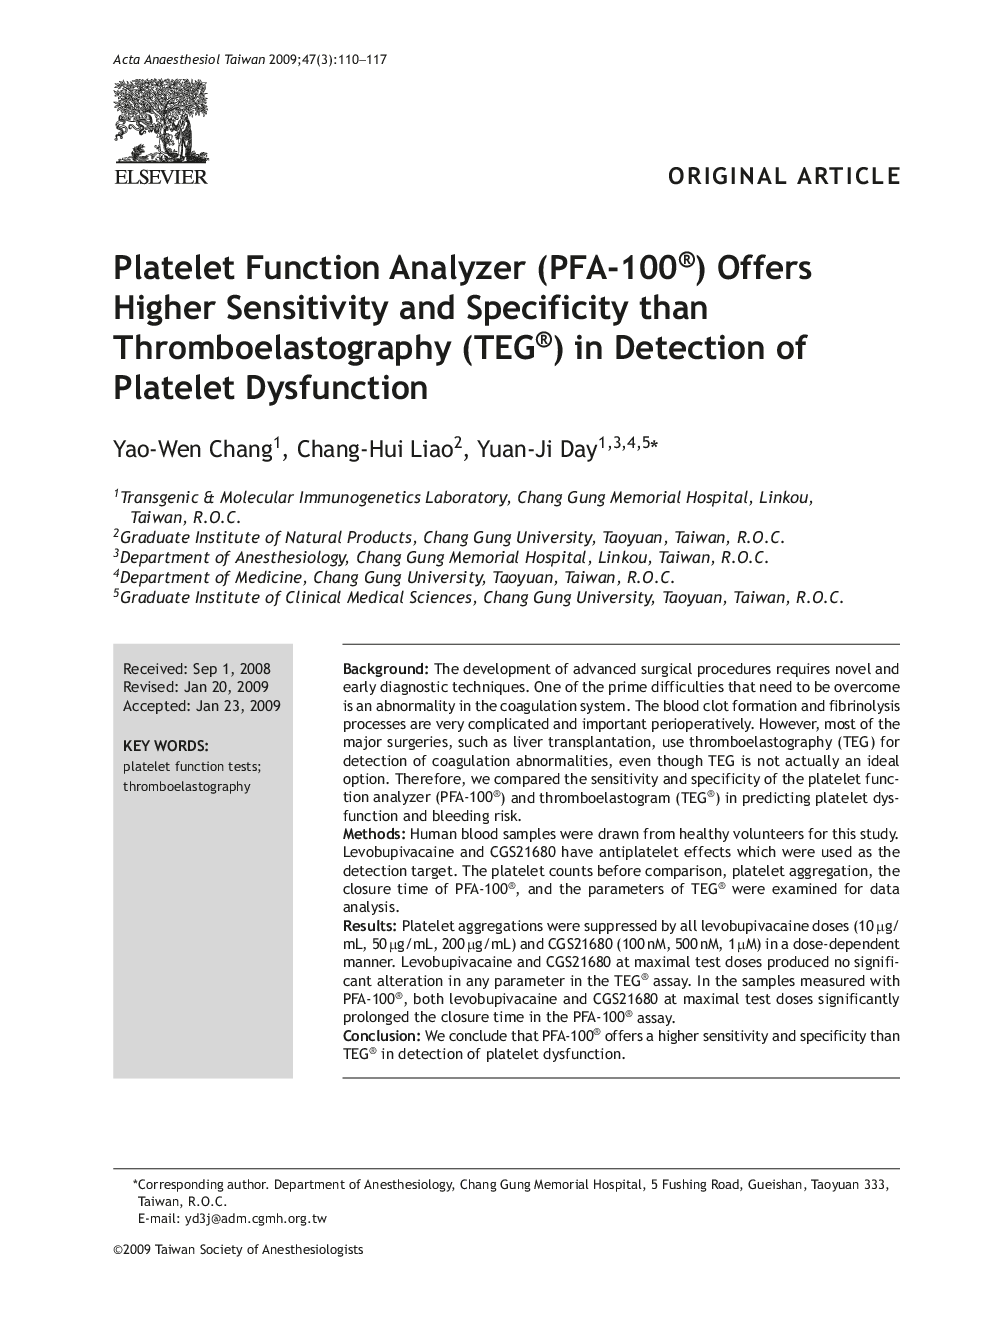 Platelet Function Analyzer (PFA-100®) Offers Higher Sensitivity and Specificity than Thromboelastography (TEG®) in Detection of Platelet Dysfunction